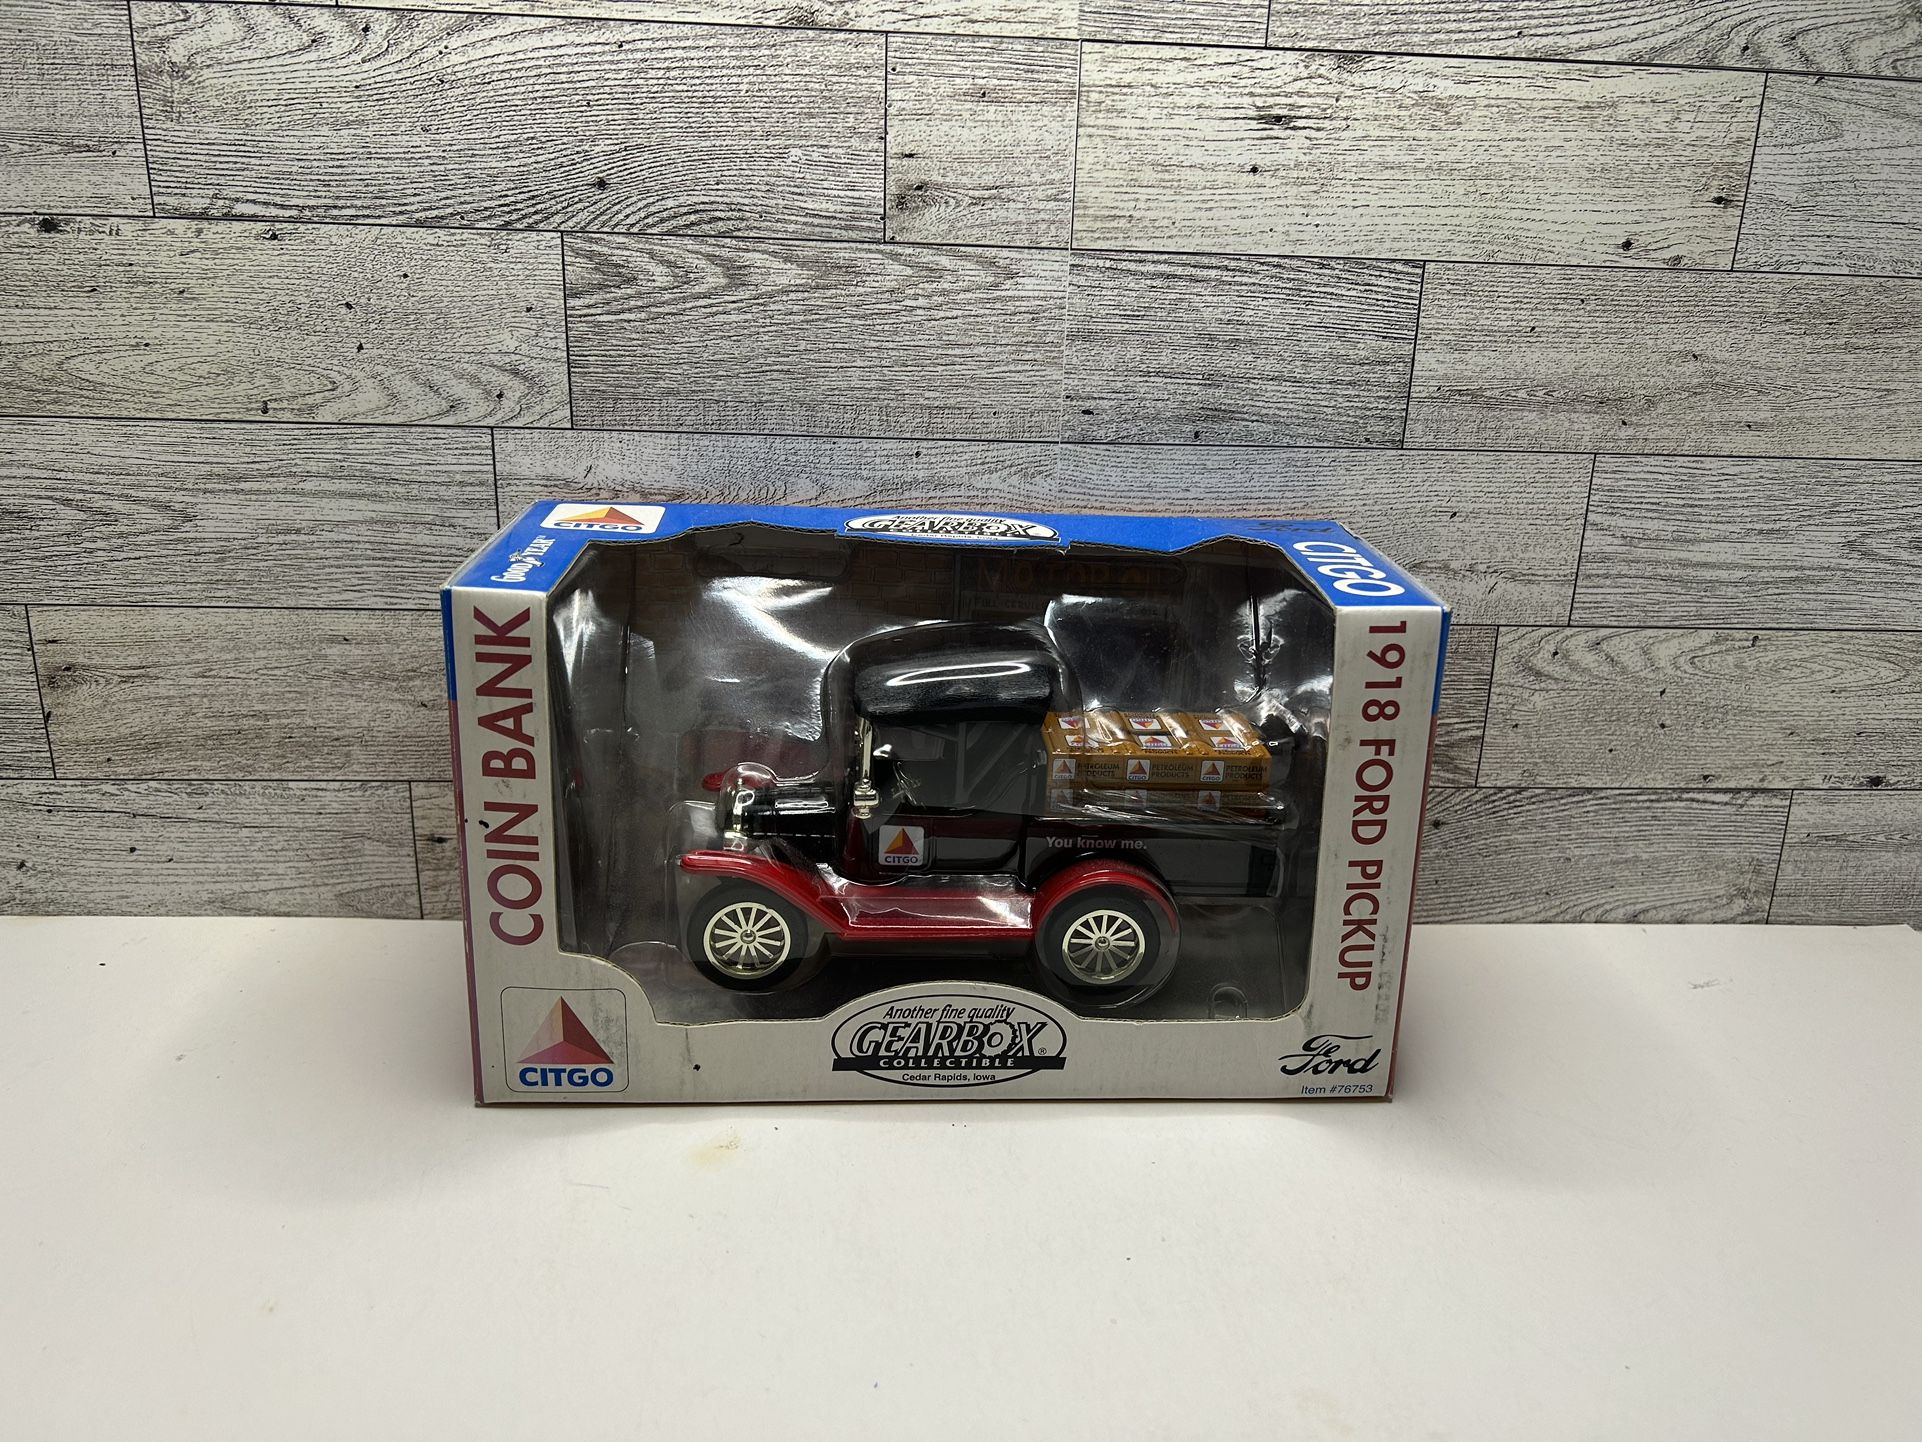 CITGO Gearbox Black ‘1918 Ford Model T Runabout Pickup Truck Coin Bank / Another Find Quality Gearbox Collectible • Die Cast Metal • Made in China